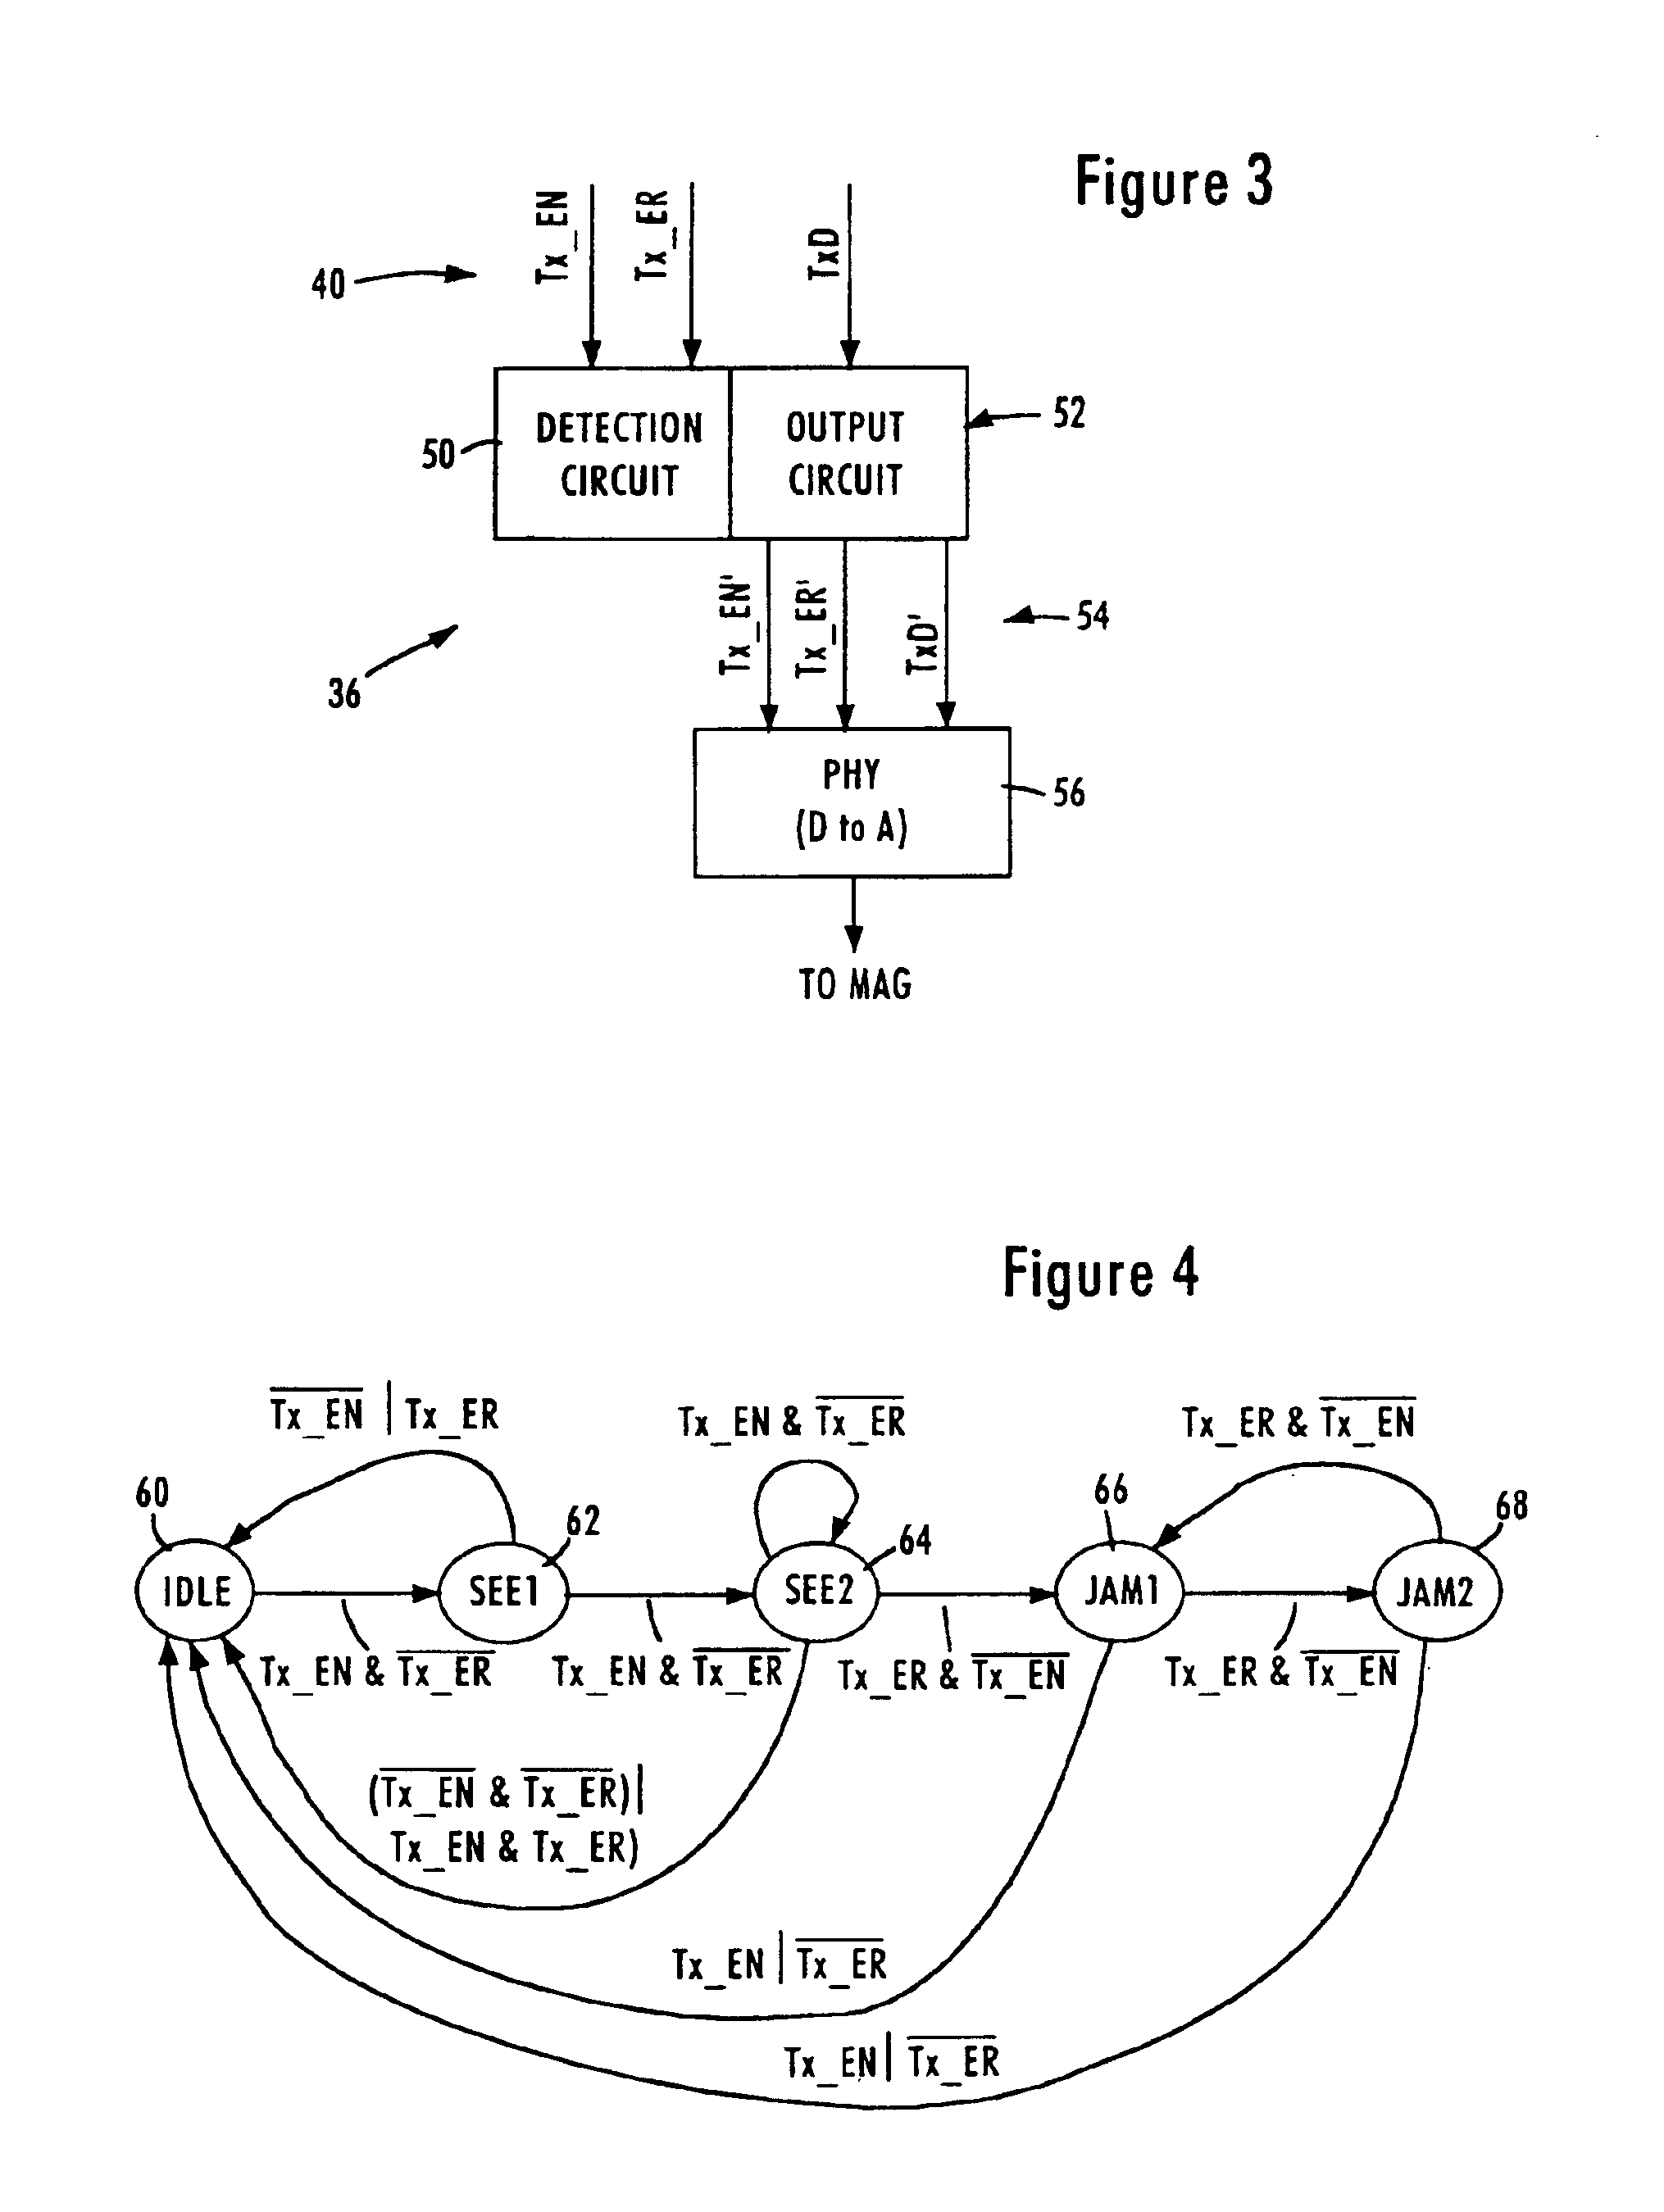 Apparatus and method for secure media independent interface communications by corrupting transmit data on selected repeater port